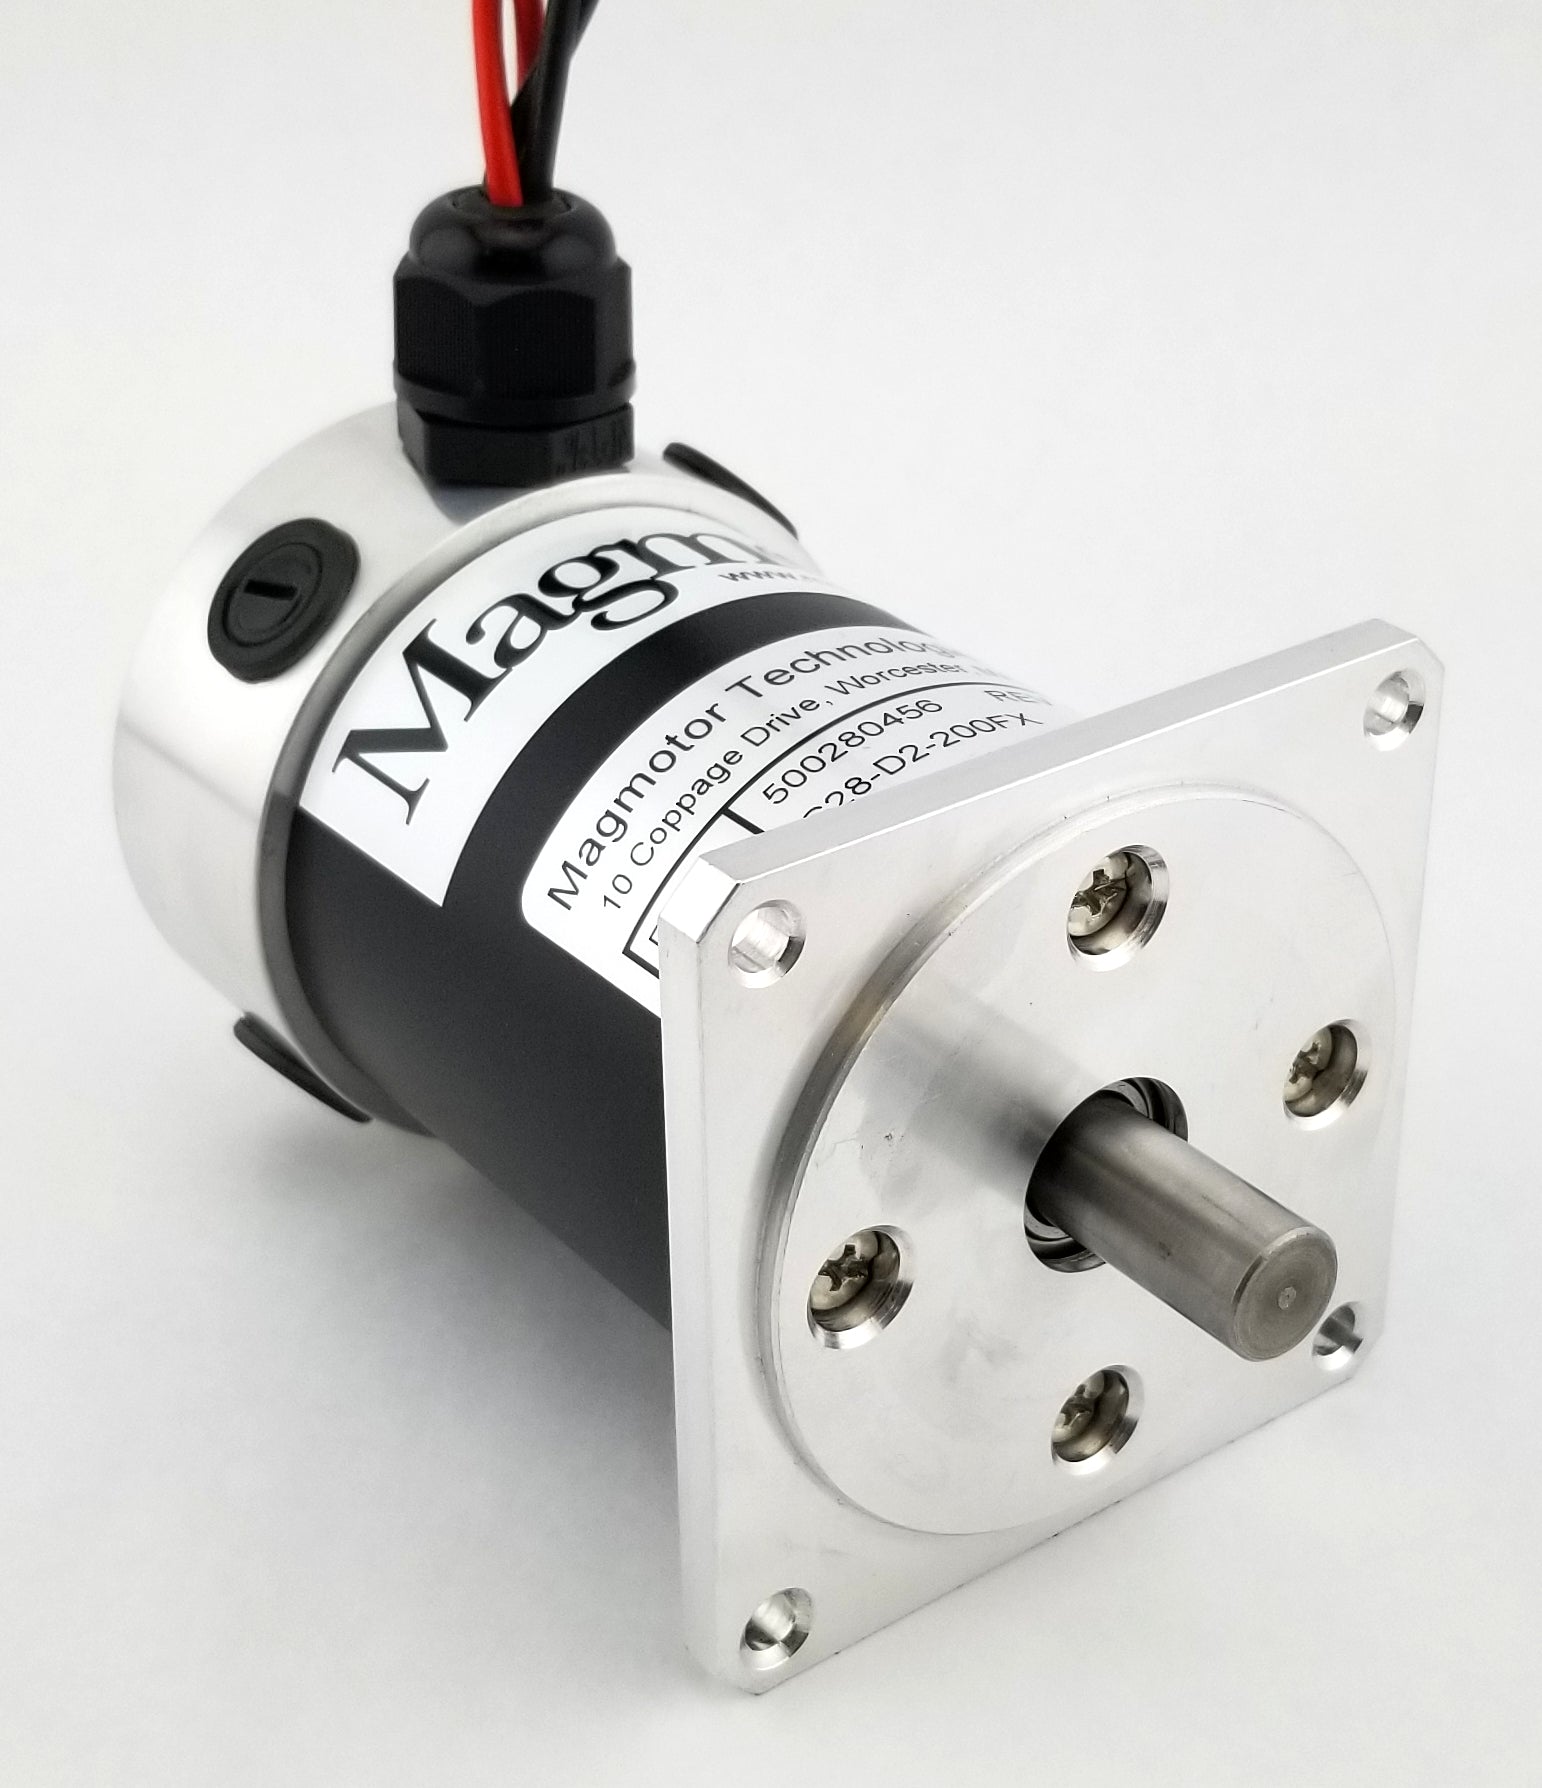 Magmotor S28-D2-200FX 12 to 24 Volt 4 Pole Brushed Motor 500280456 Front View